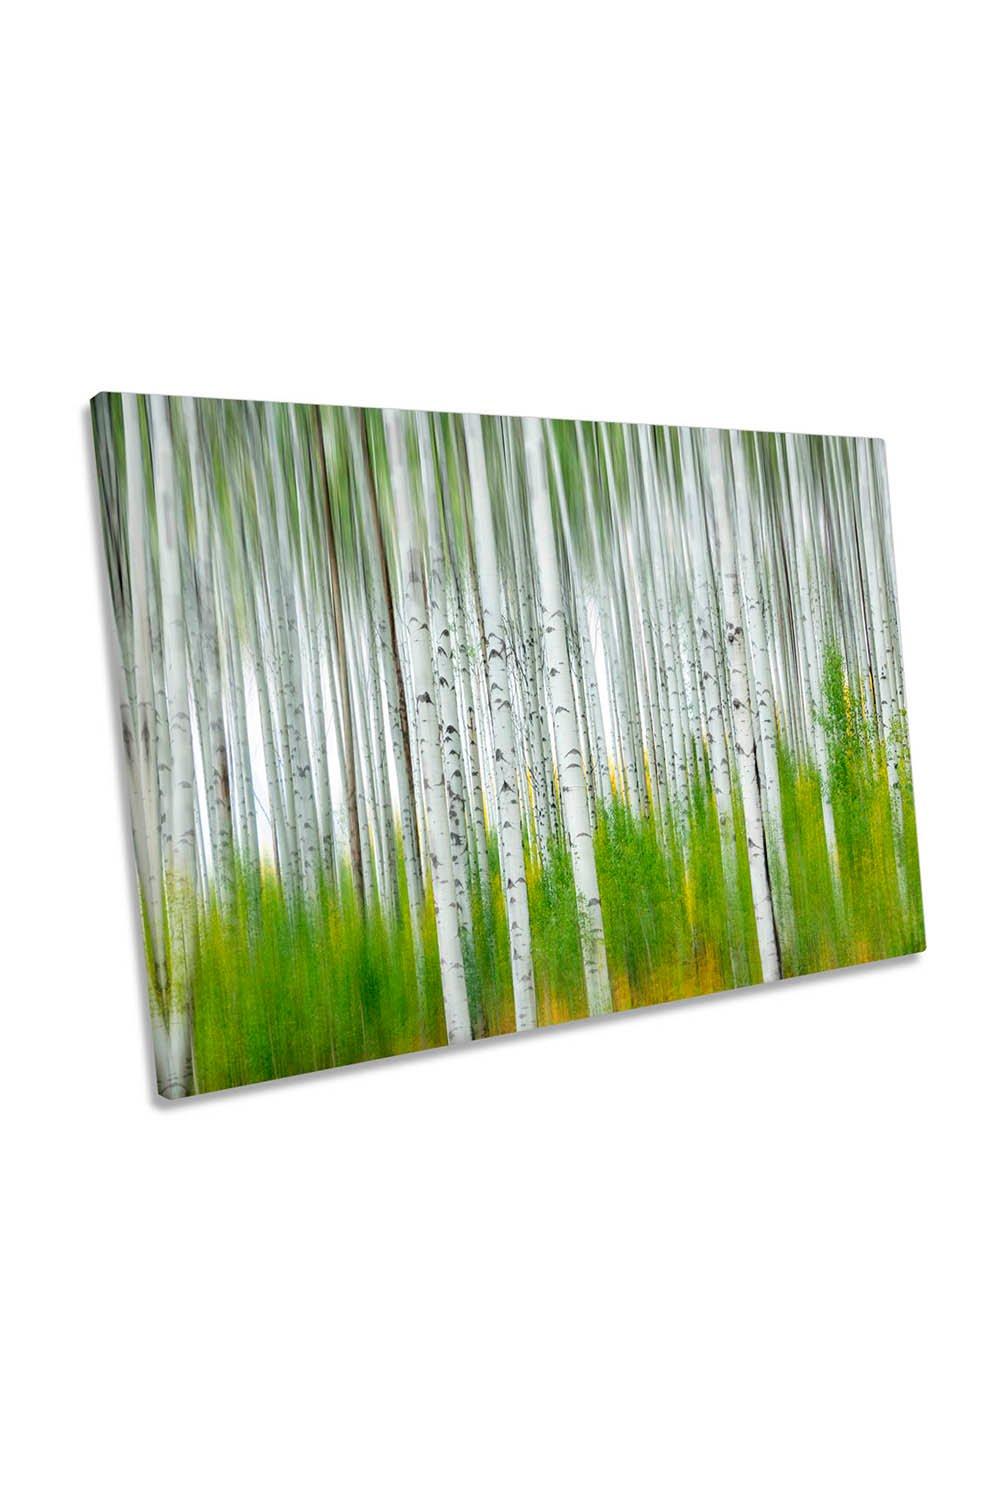 Aspen Forest Birch Trees Green Canvas Wall Art Picture Print